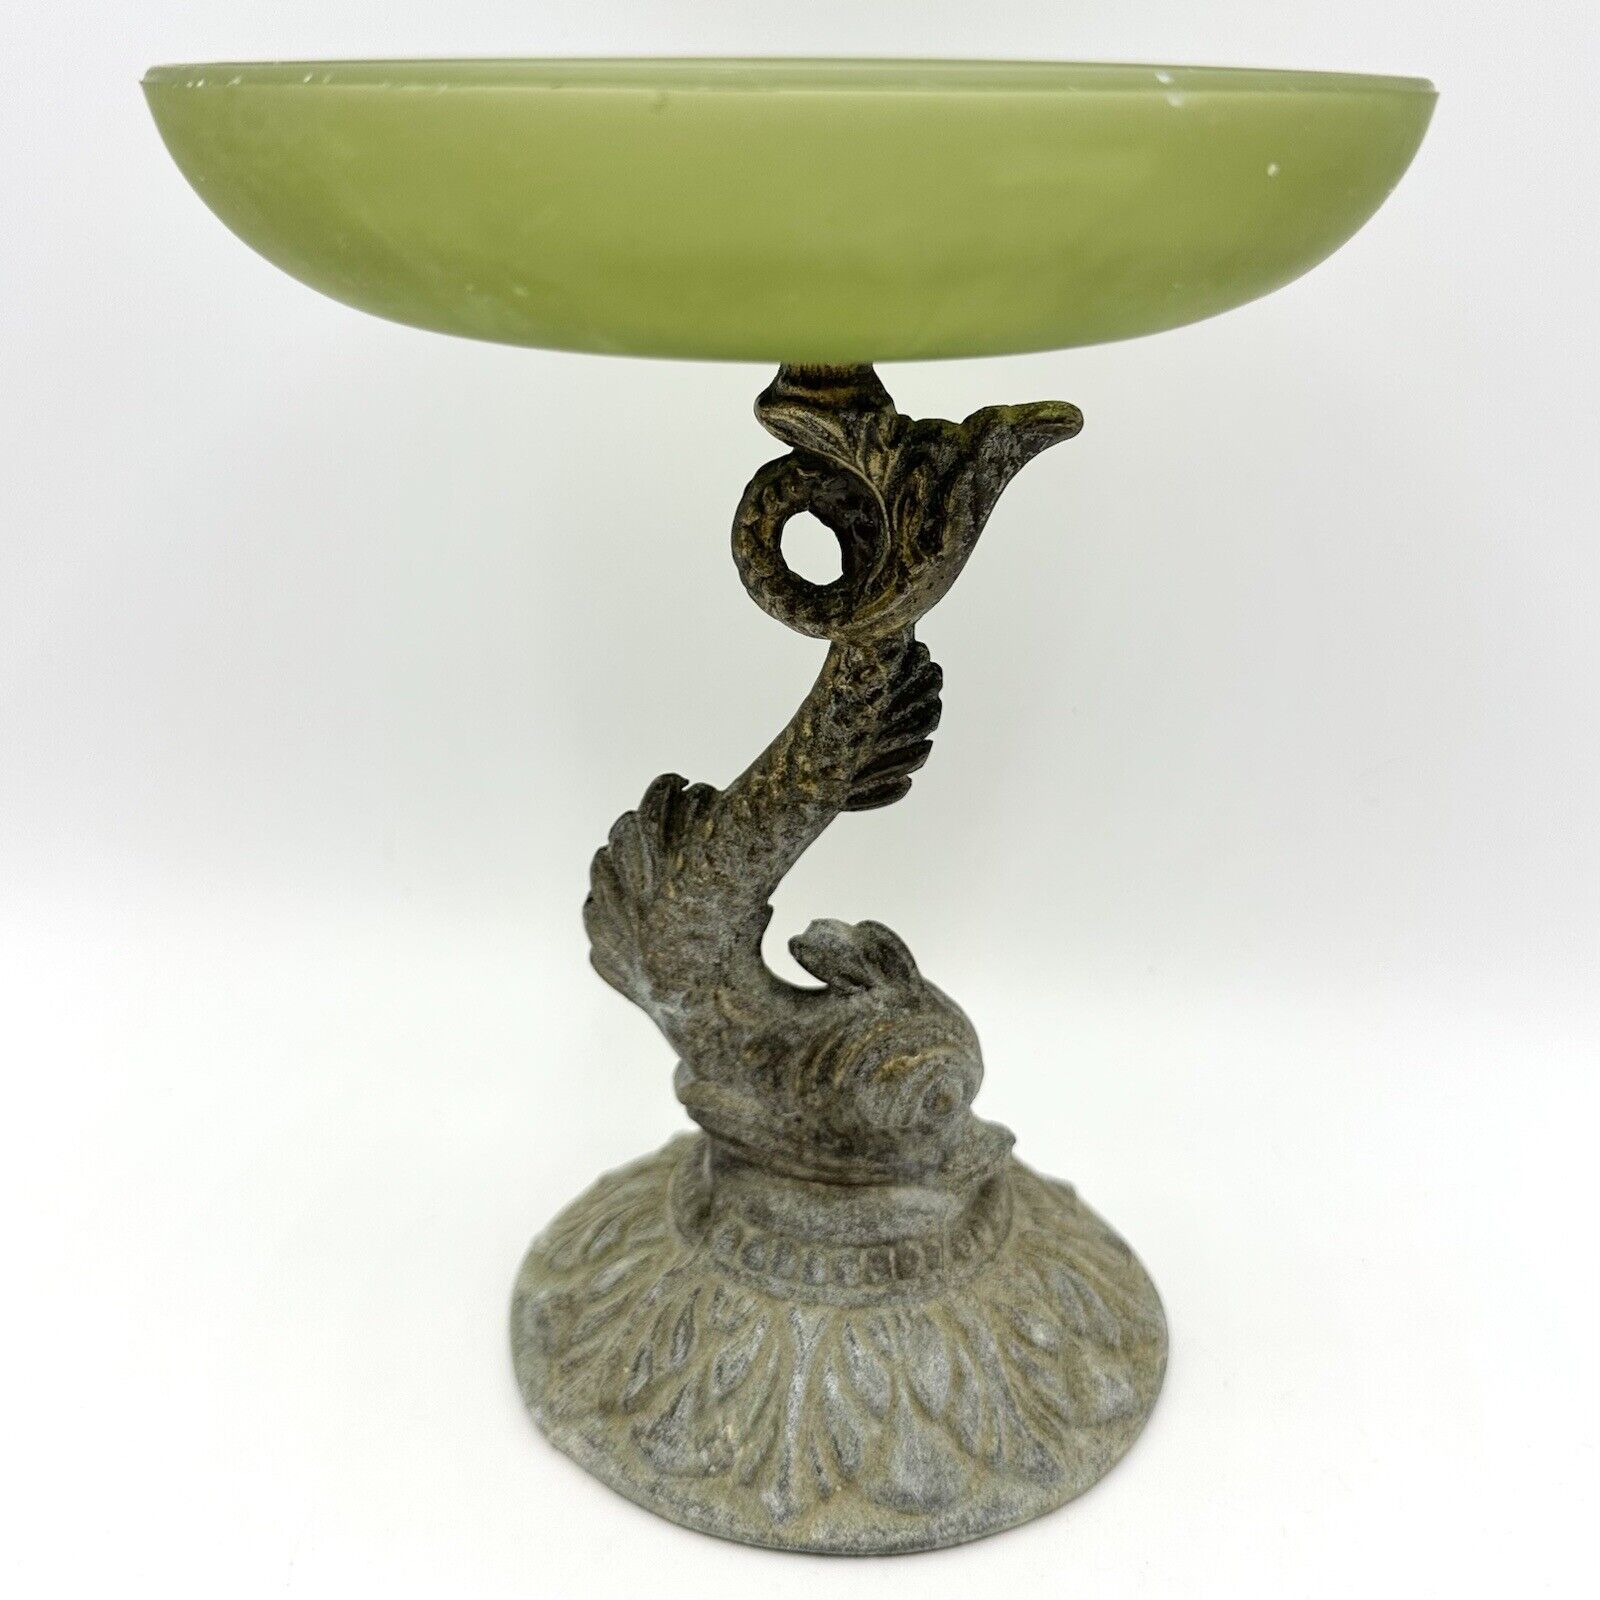 Vintage Metal Koi Fish Dolphin Pedestal Dish Frosted Green Glass Compote Patina